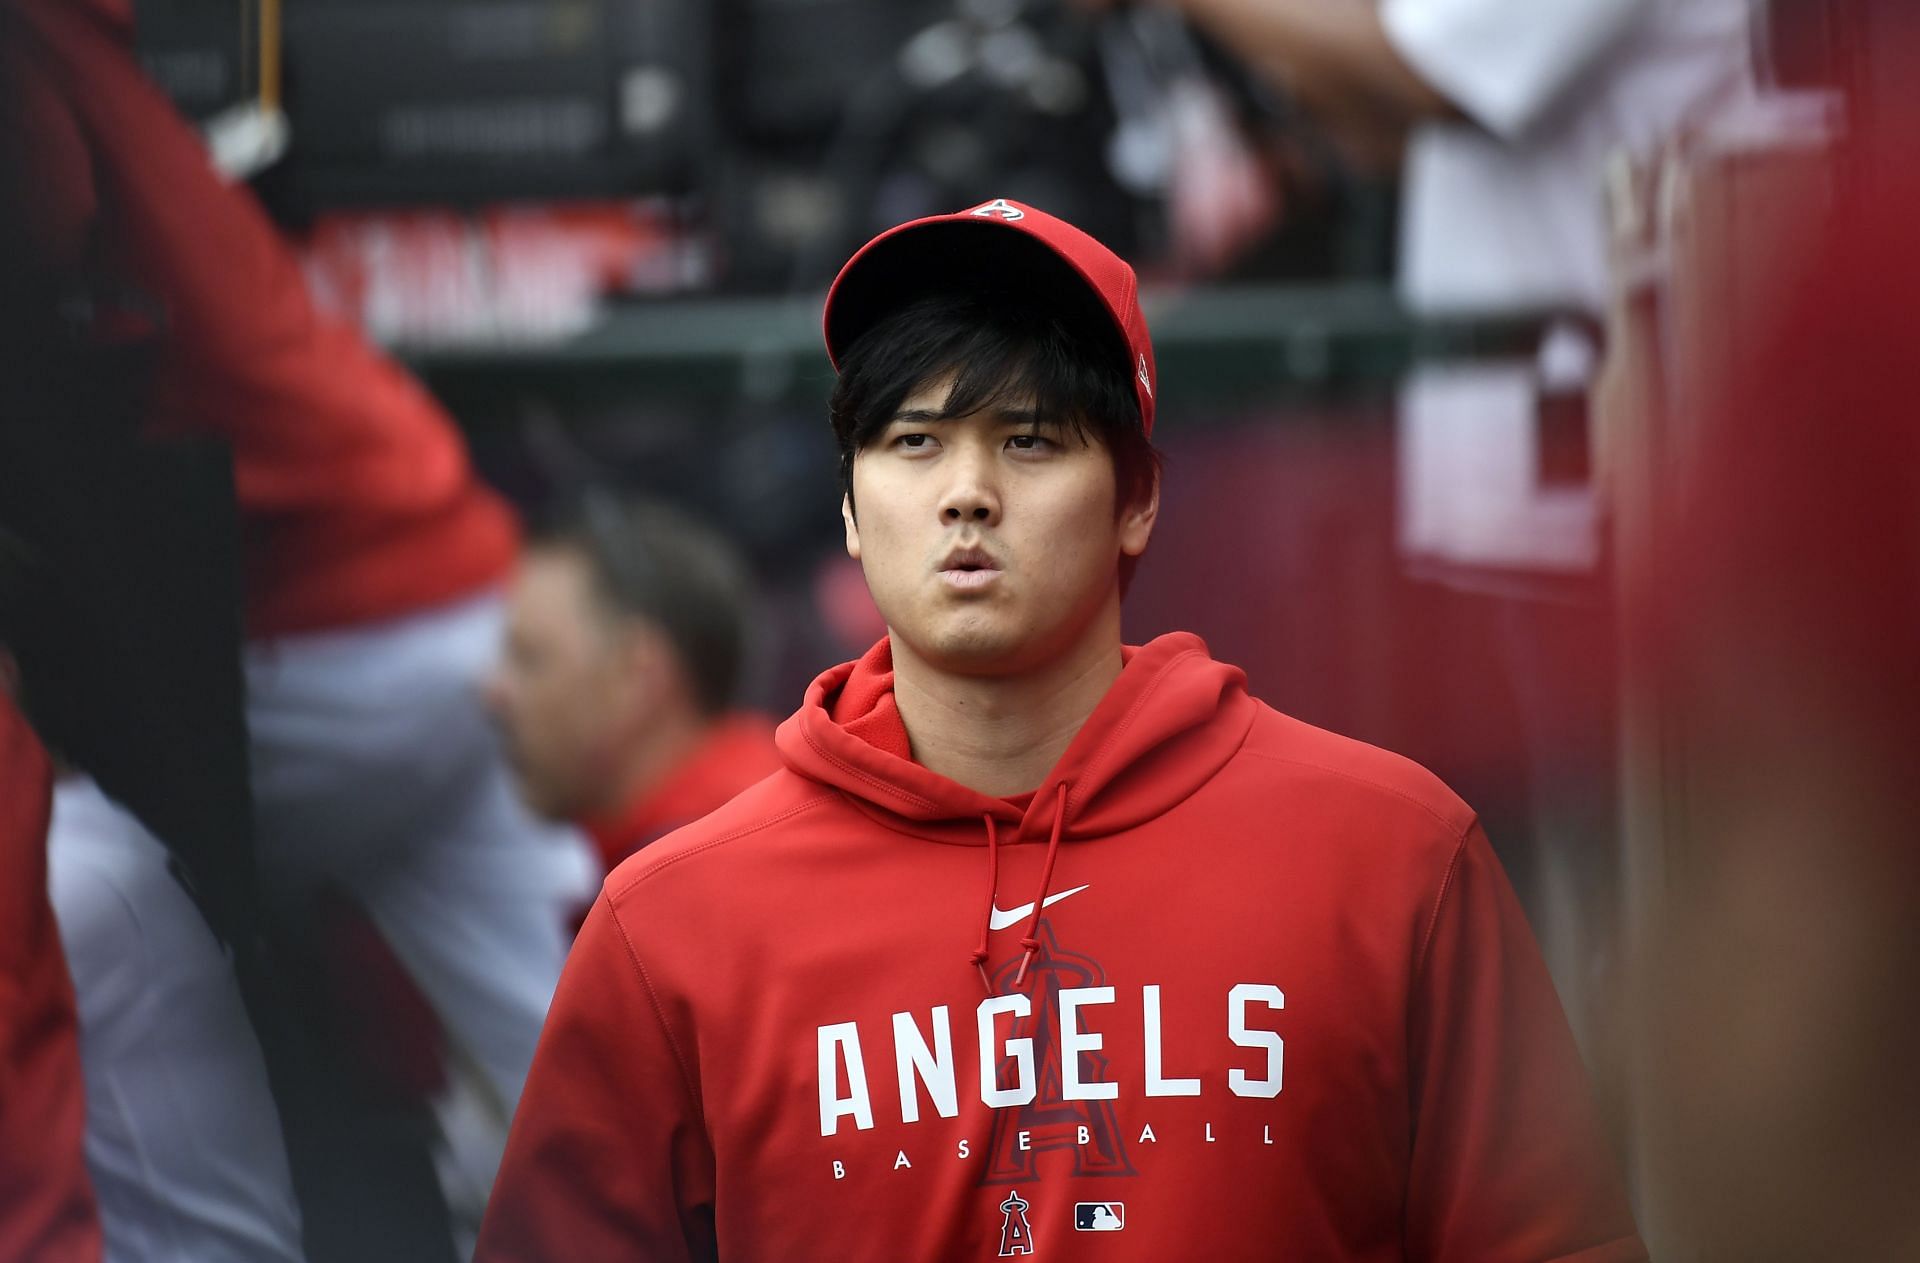 Tiki & Tierney: Shohei Ohtani in New York - Yankees or Mets?